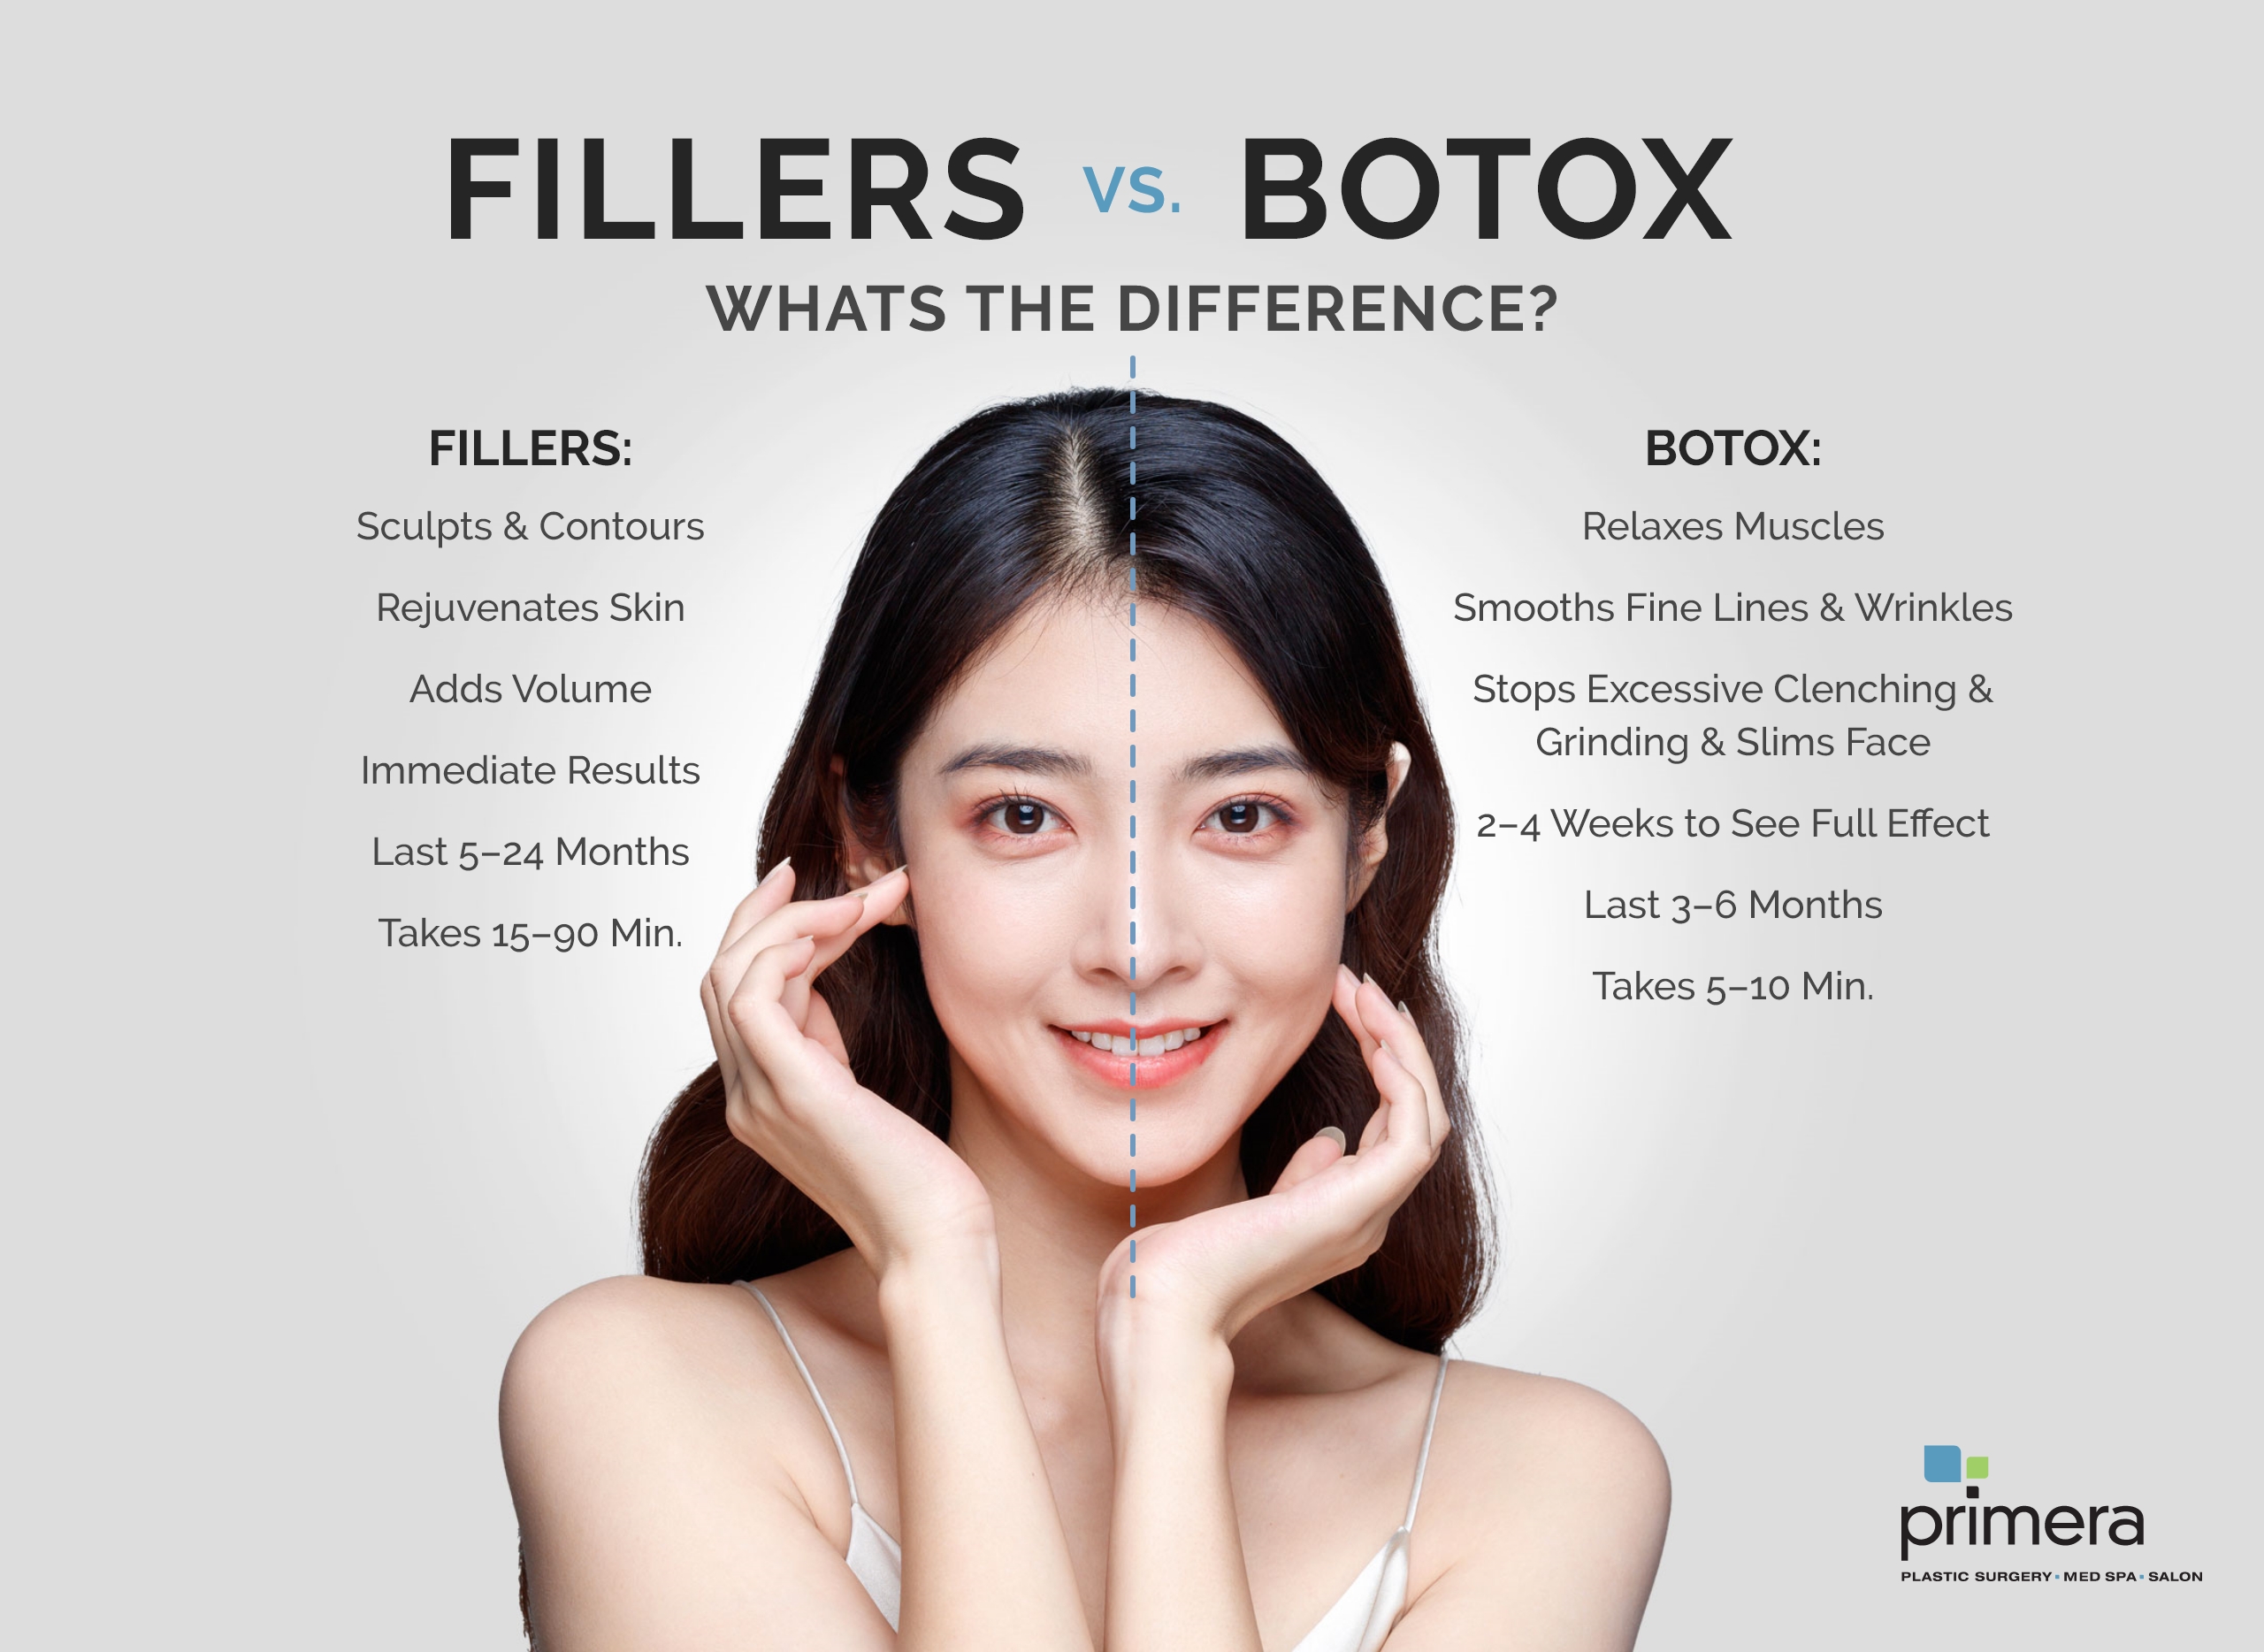 Fillers vs. Botox What's The Difference?